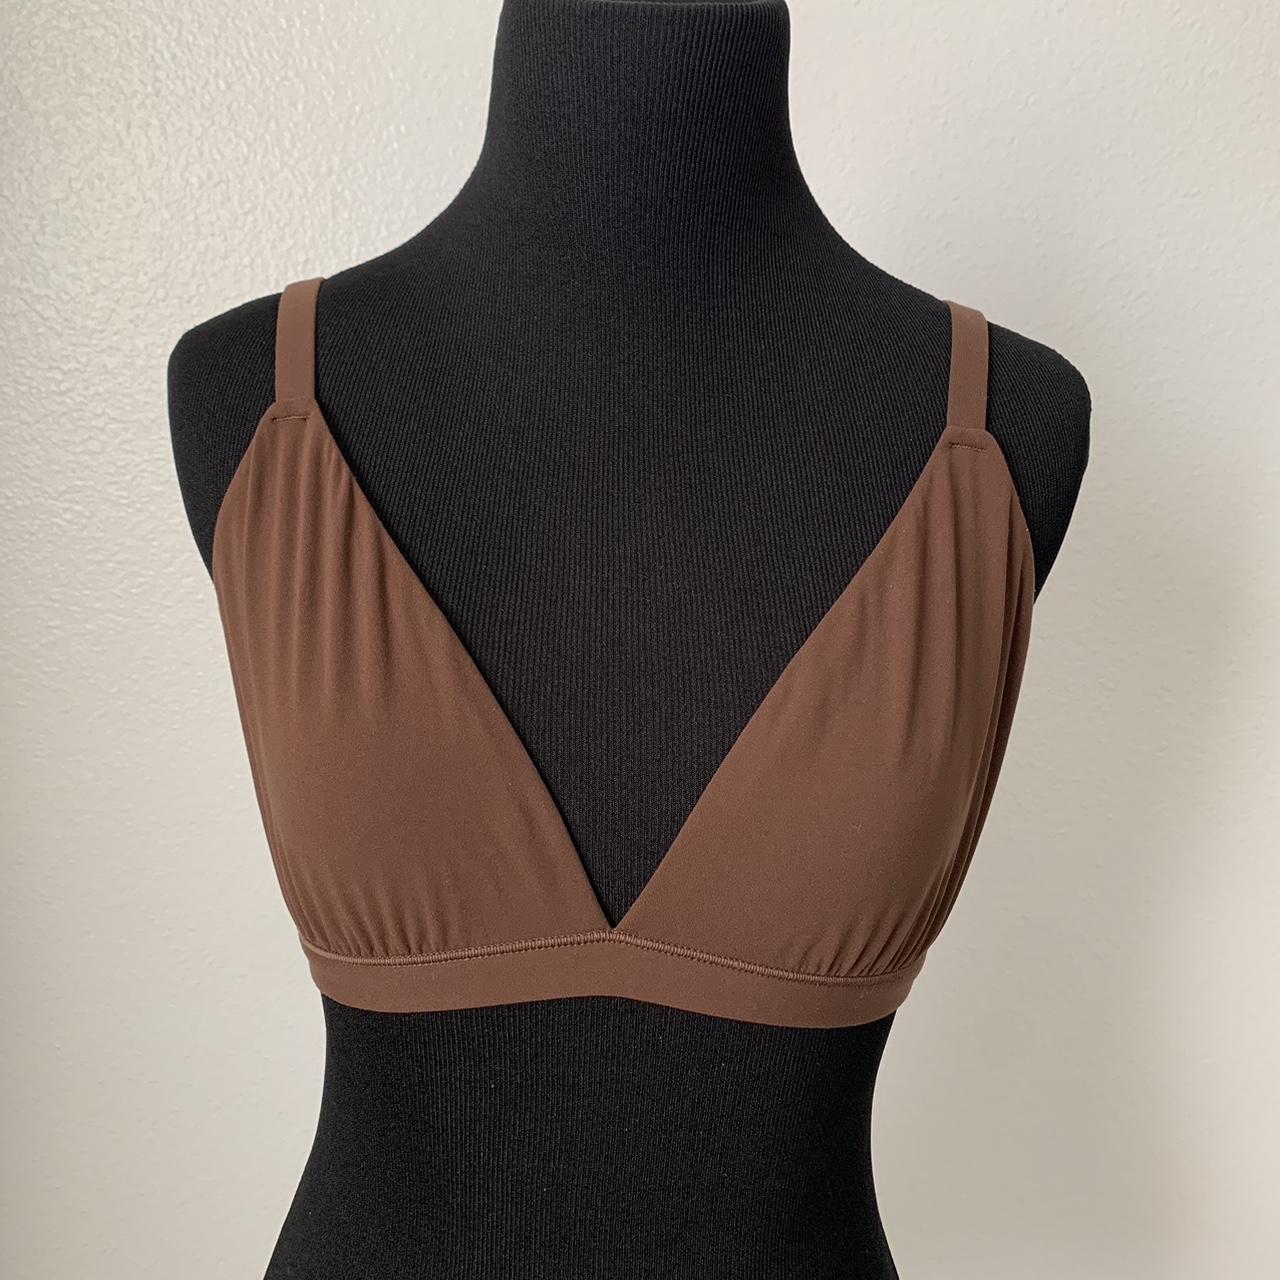 Skims fits everybody triangle bralette in the color - Depop